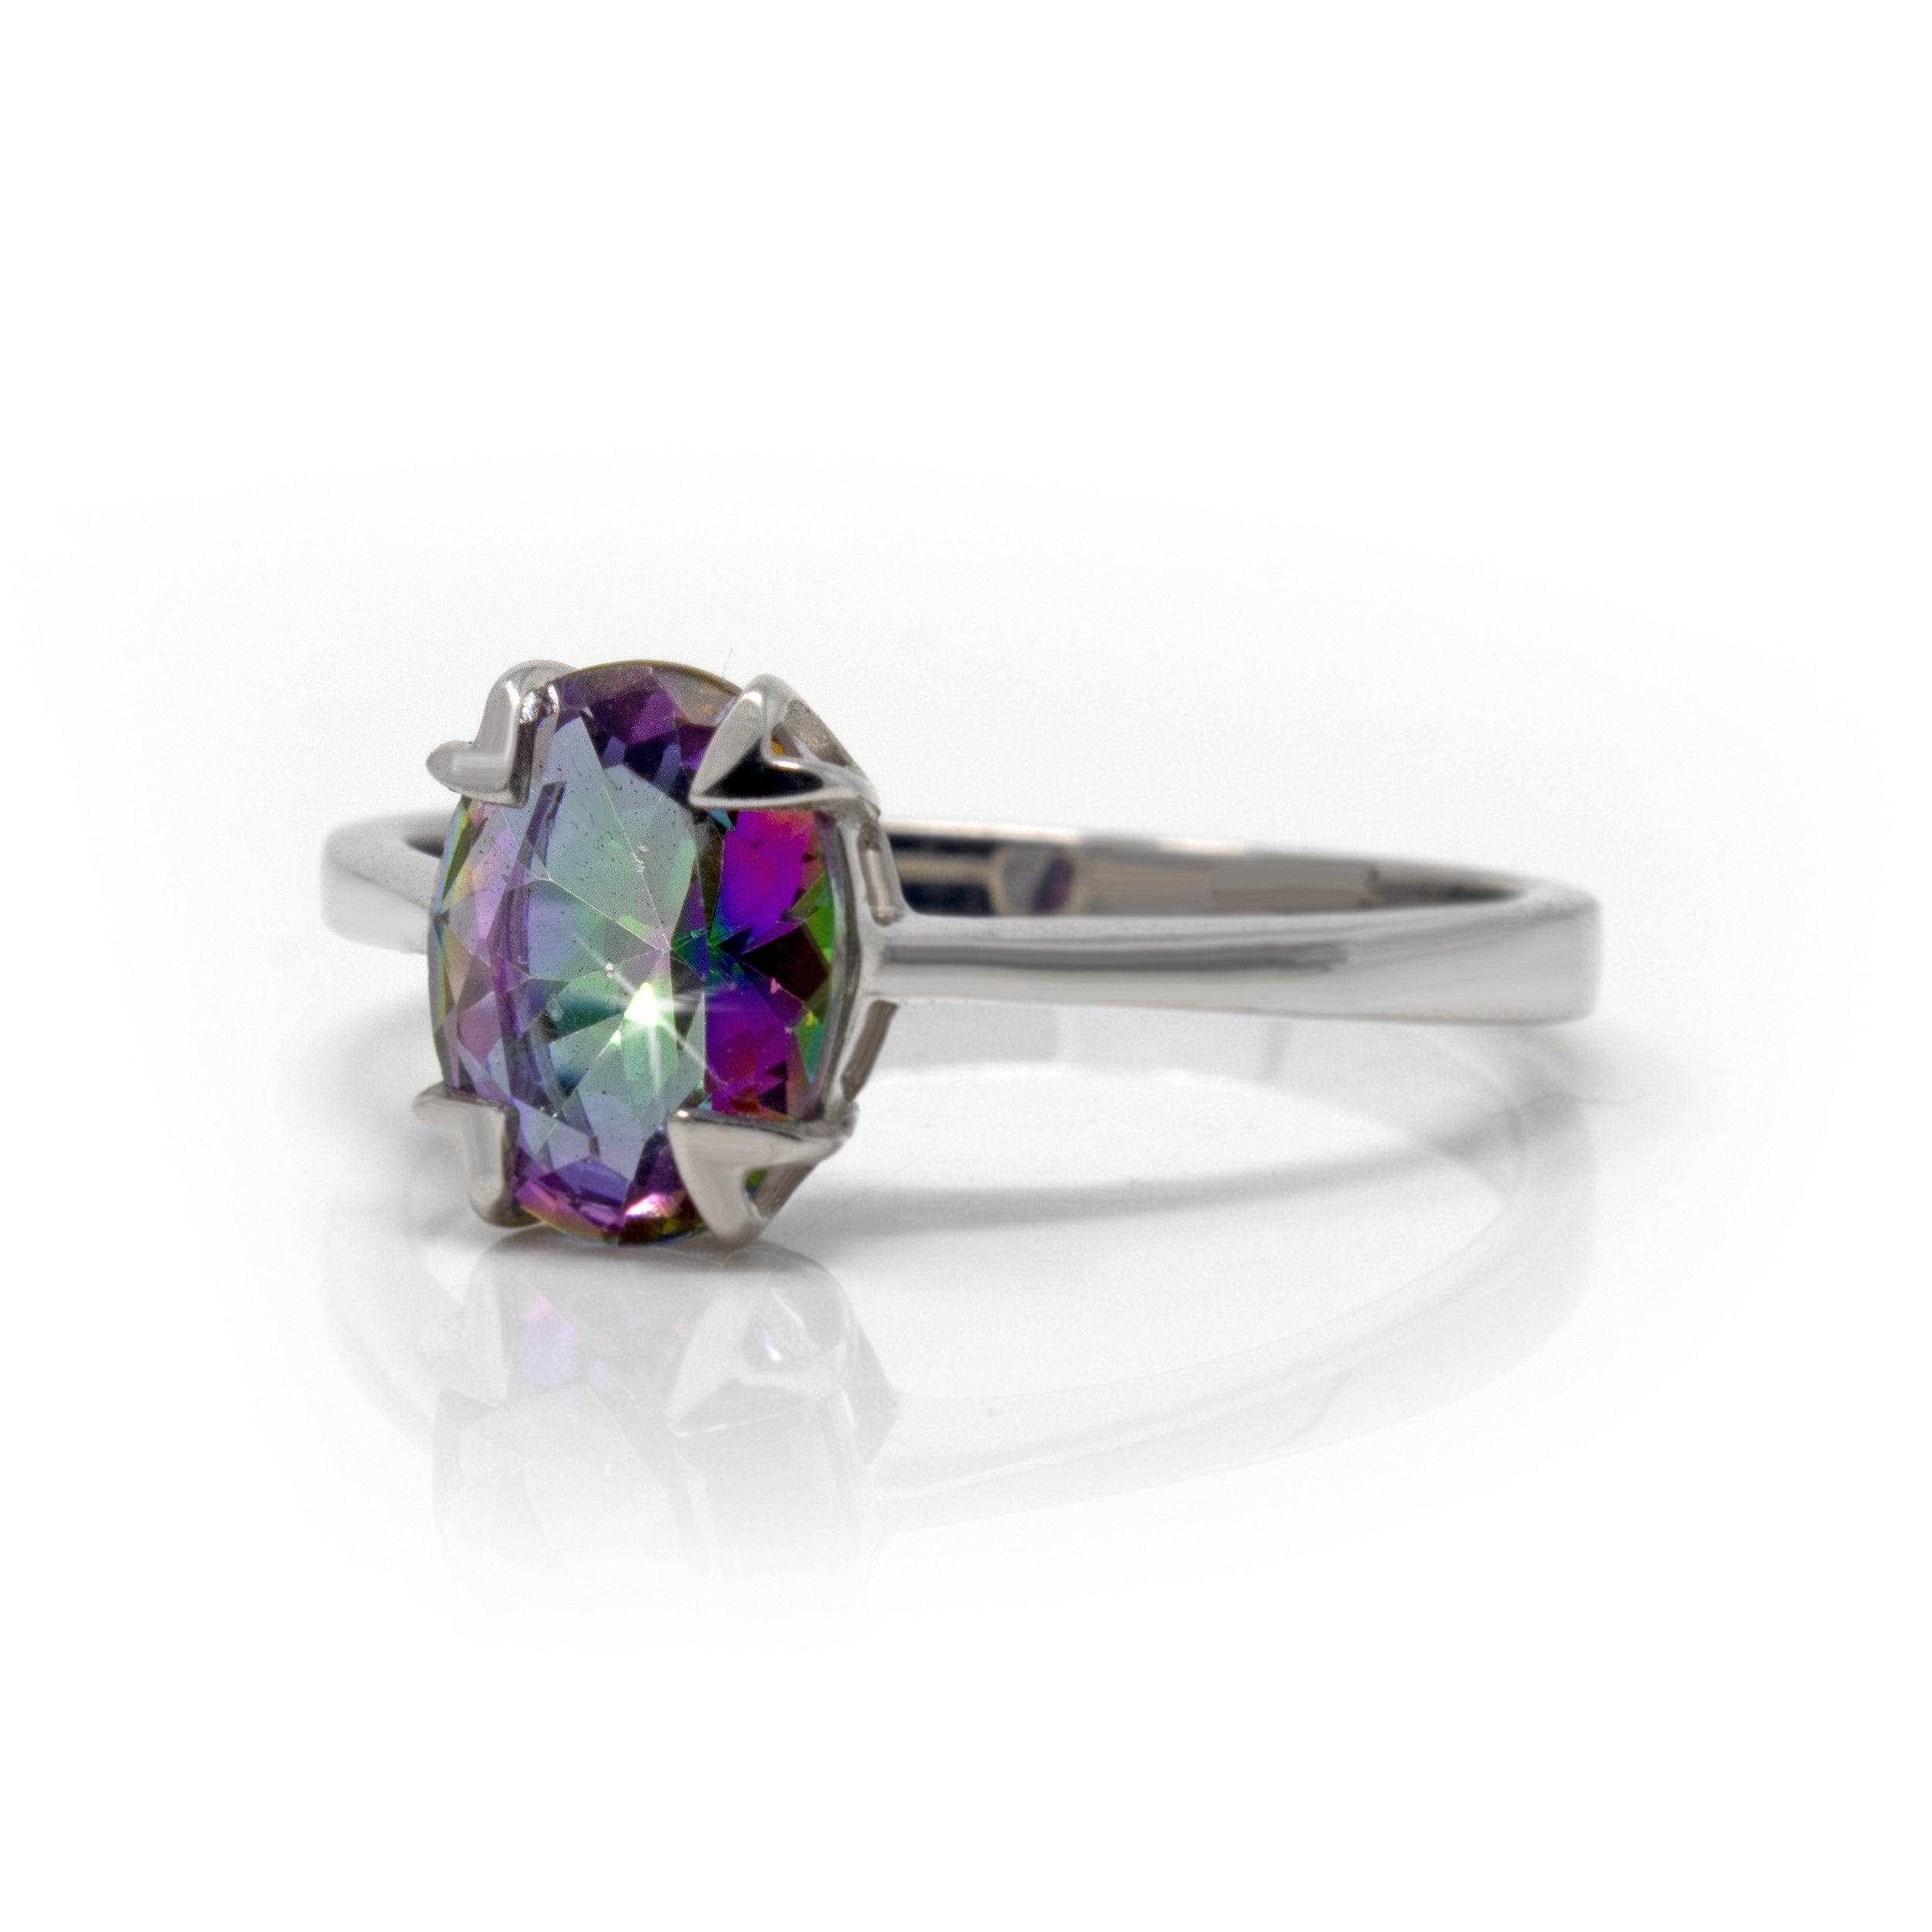 Mystic Topaz Ring Size 5 - Faceted Prong Set Oval With Fancy Open Silver Prongs & Bezel Set On Silver Vert Band